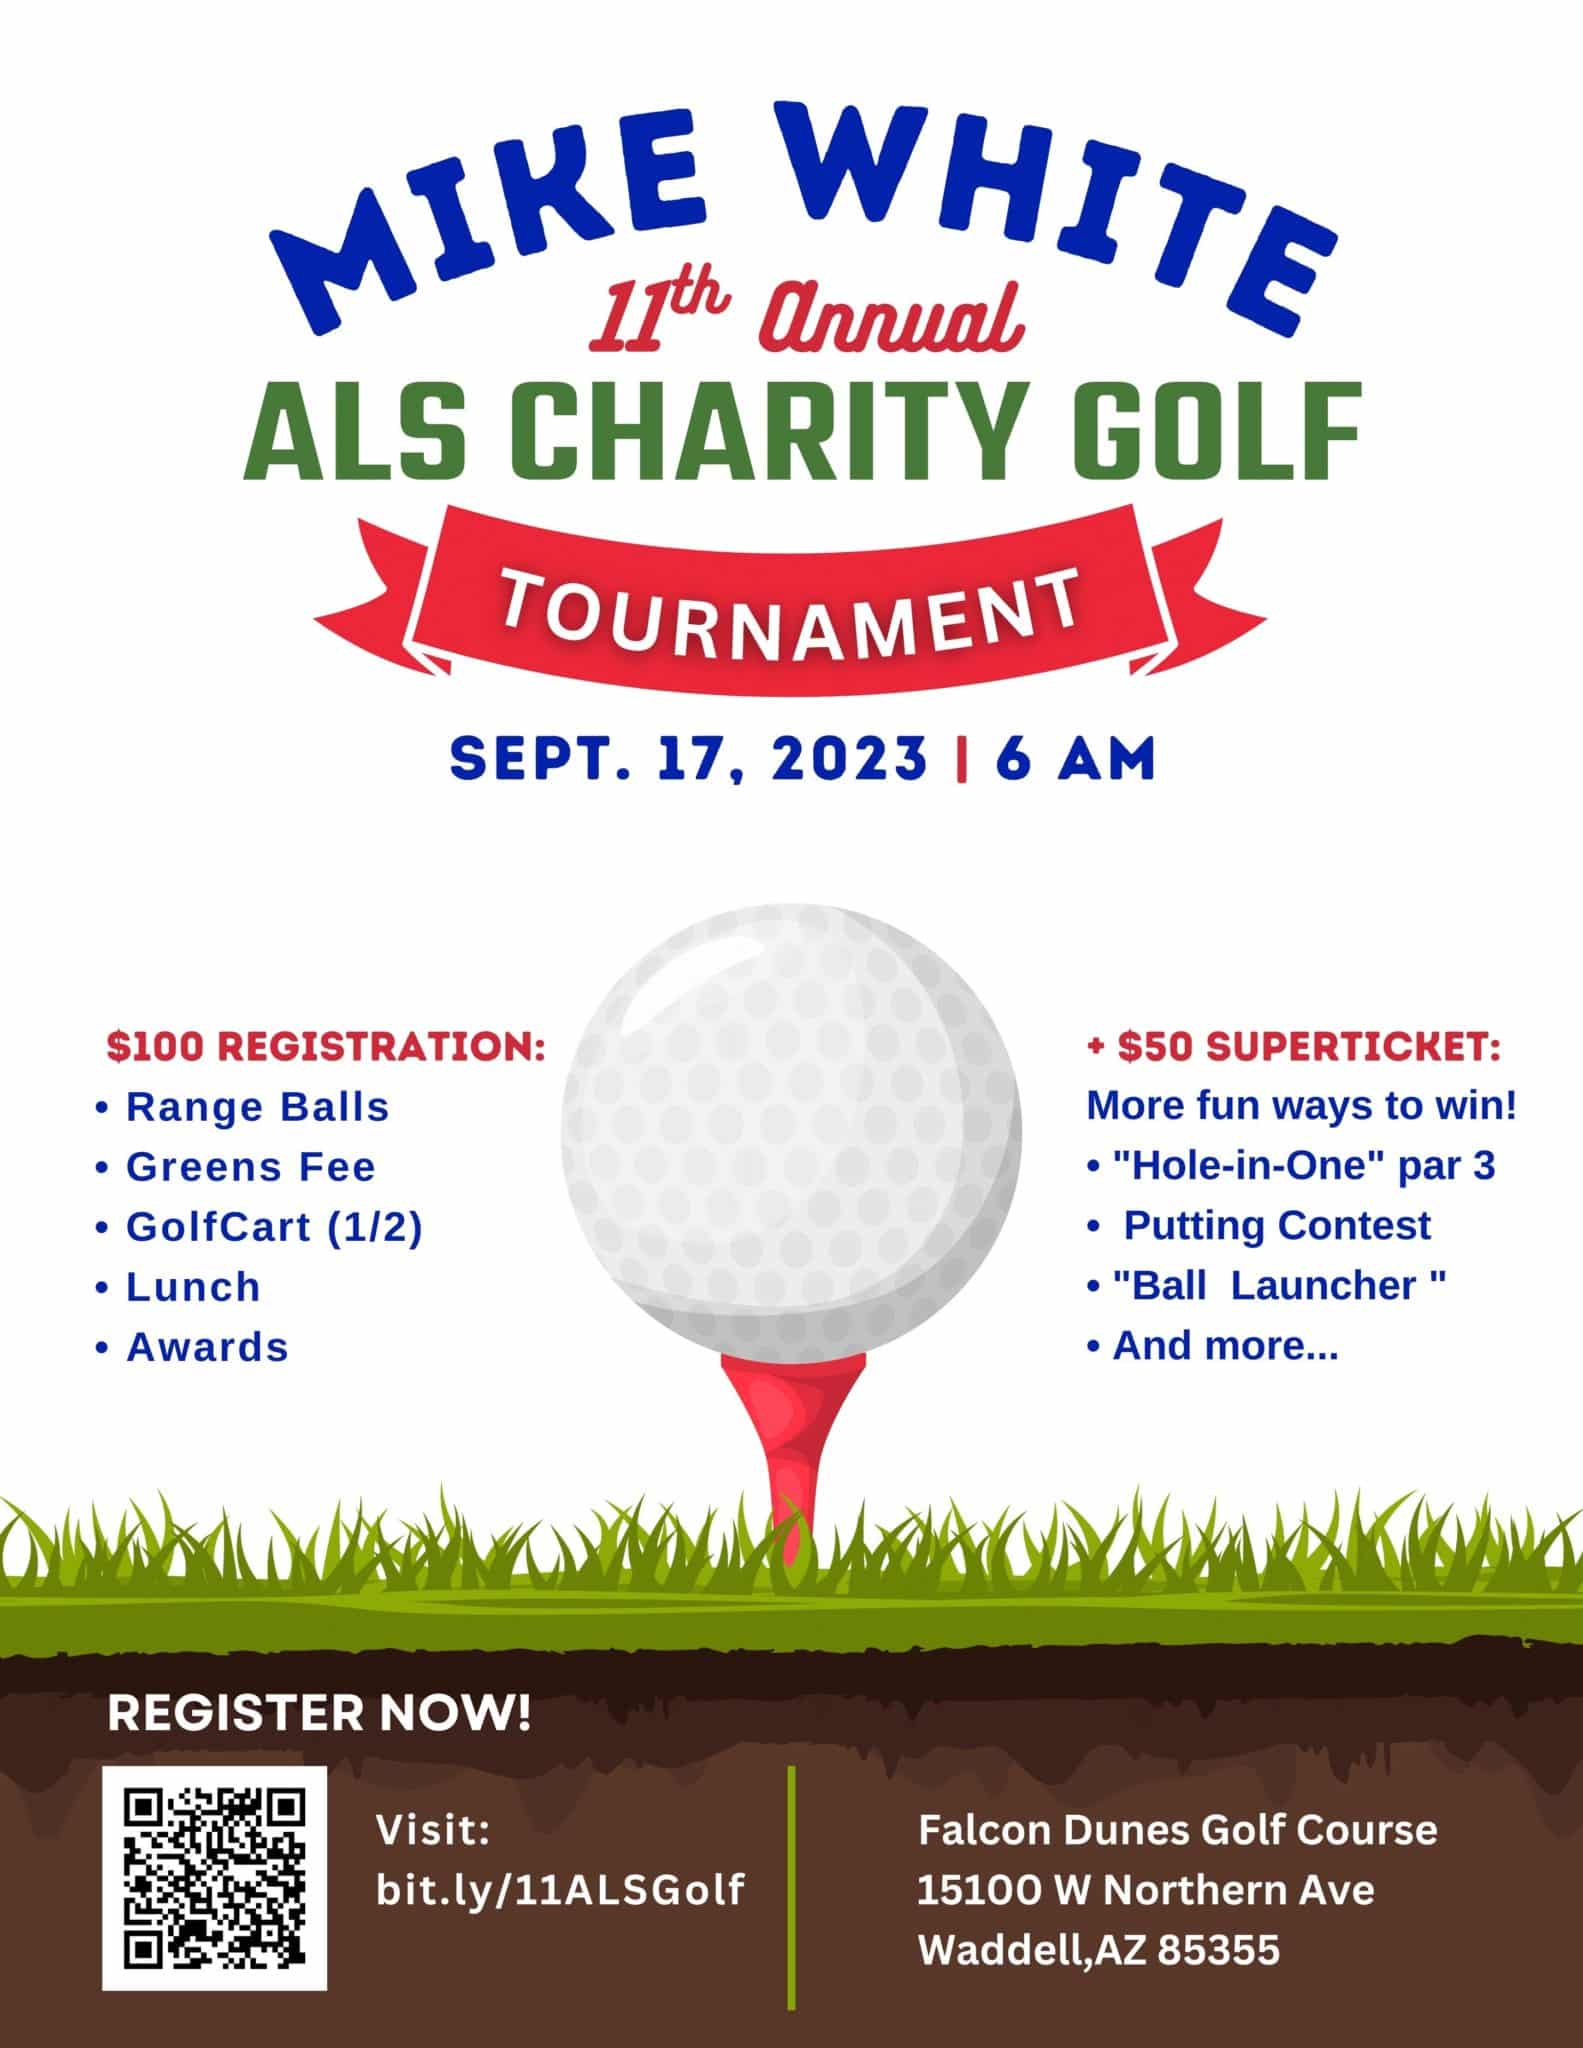 Mike White 11th Annual ALS Charity Golf Tournament September 17, 2023 6:00am Falcon Dunes Golf Course 15100 W Northern Ave Waddell, AZ 85355 $100 Registration includes game balls, Greens Fee, Golf Catt 1/2, Lunch, and Awards + $50 Superticket gives you more ways to win! "Hole-in-One" par 3, Putting Contest, "Ball Launcher" and more!